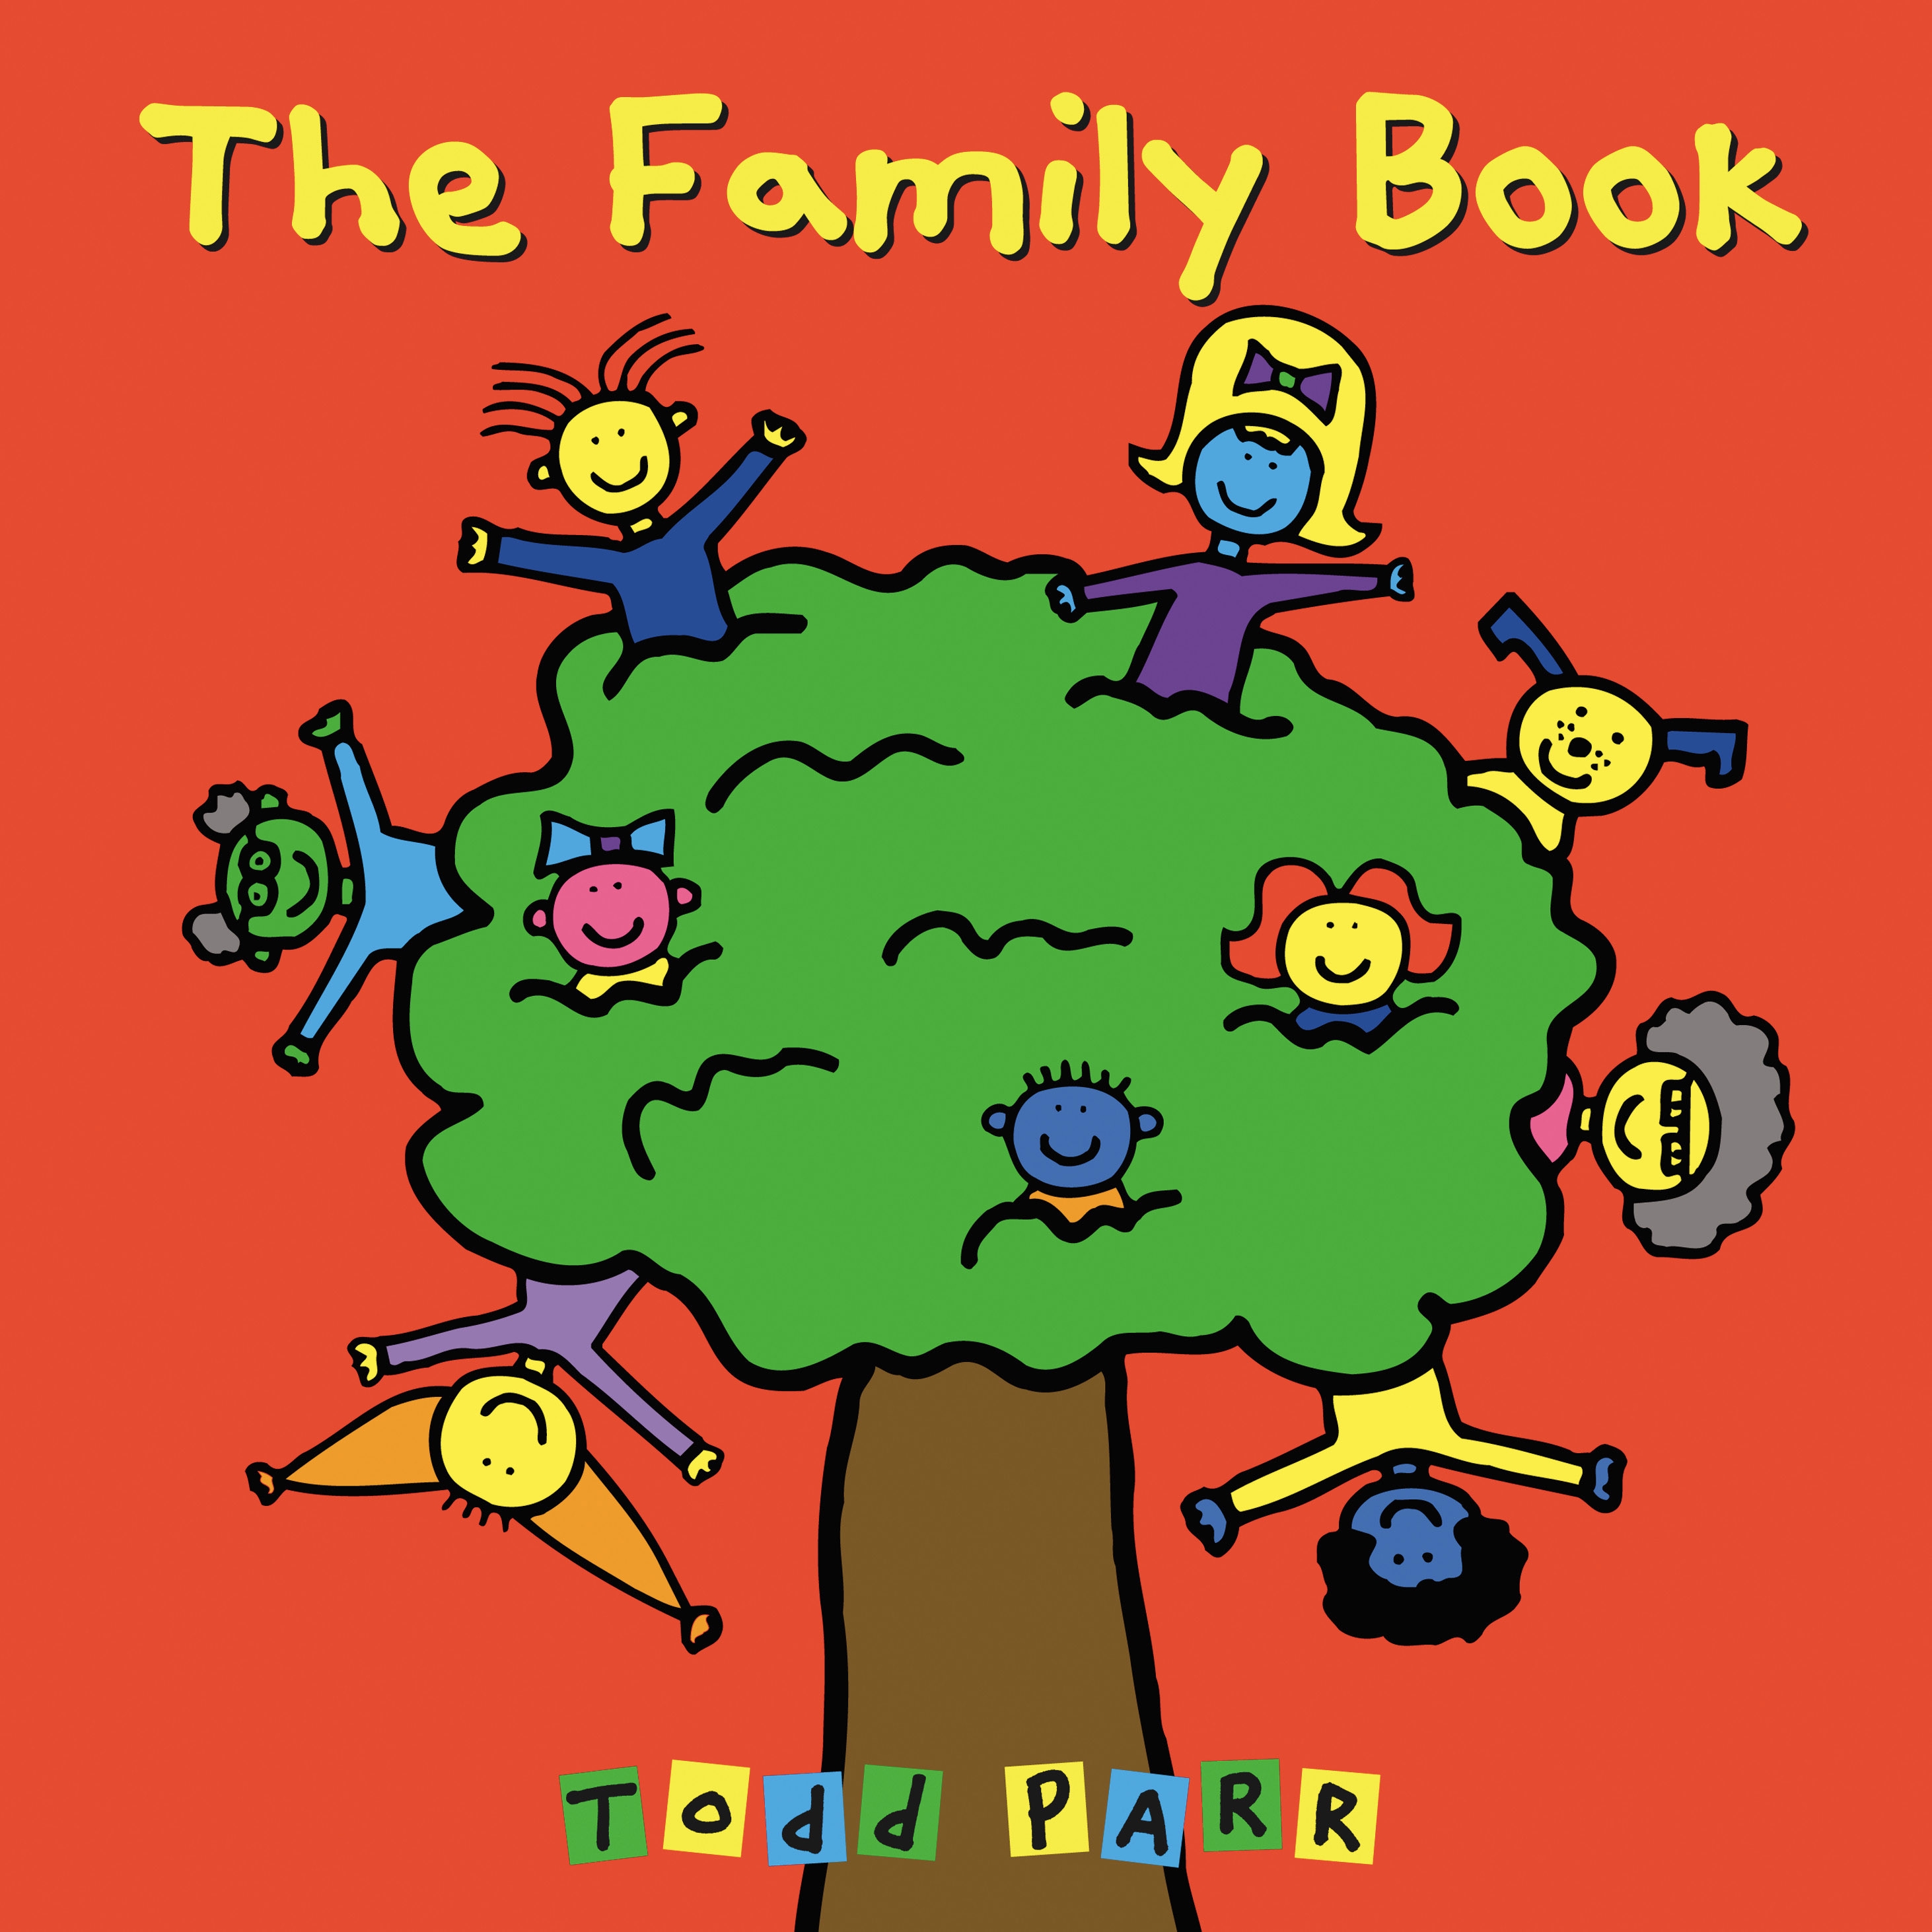 The Family Book by Todd Parr | Hachette UK